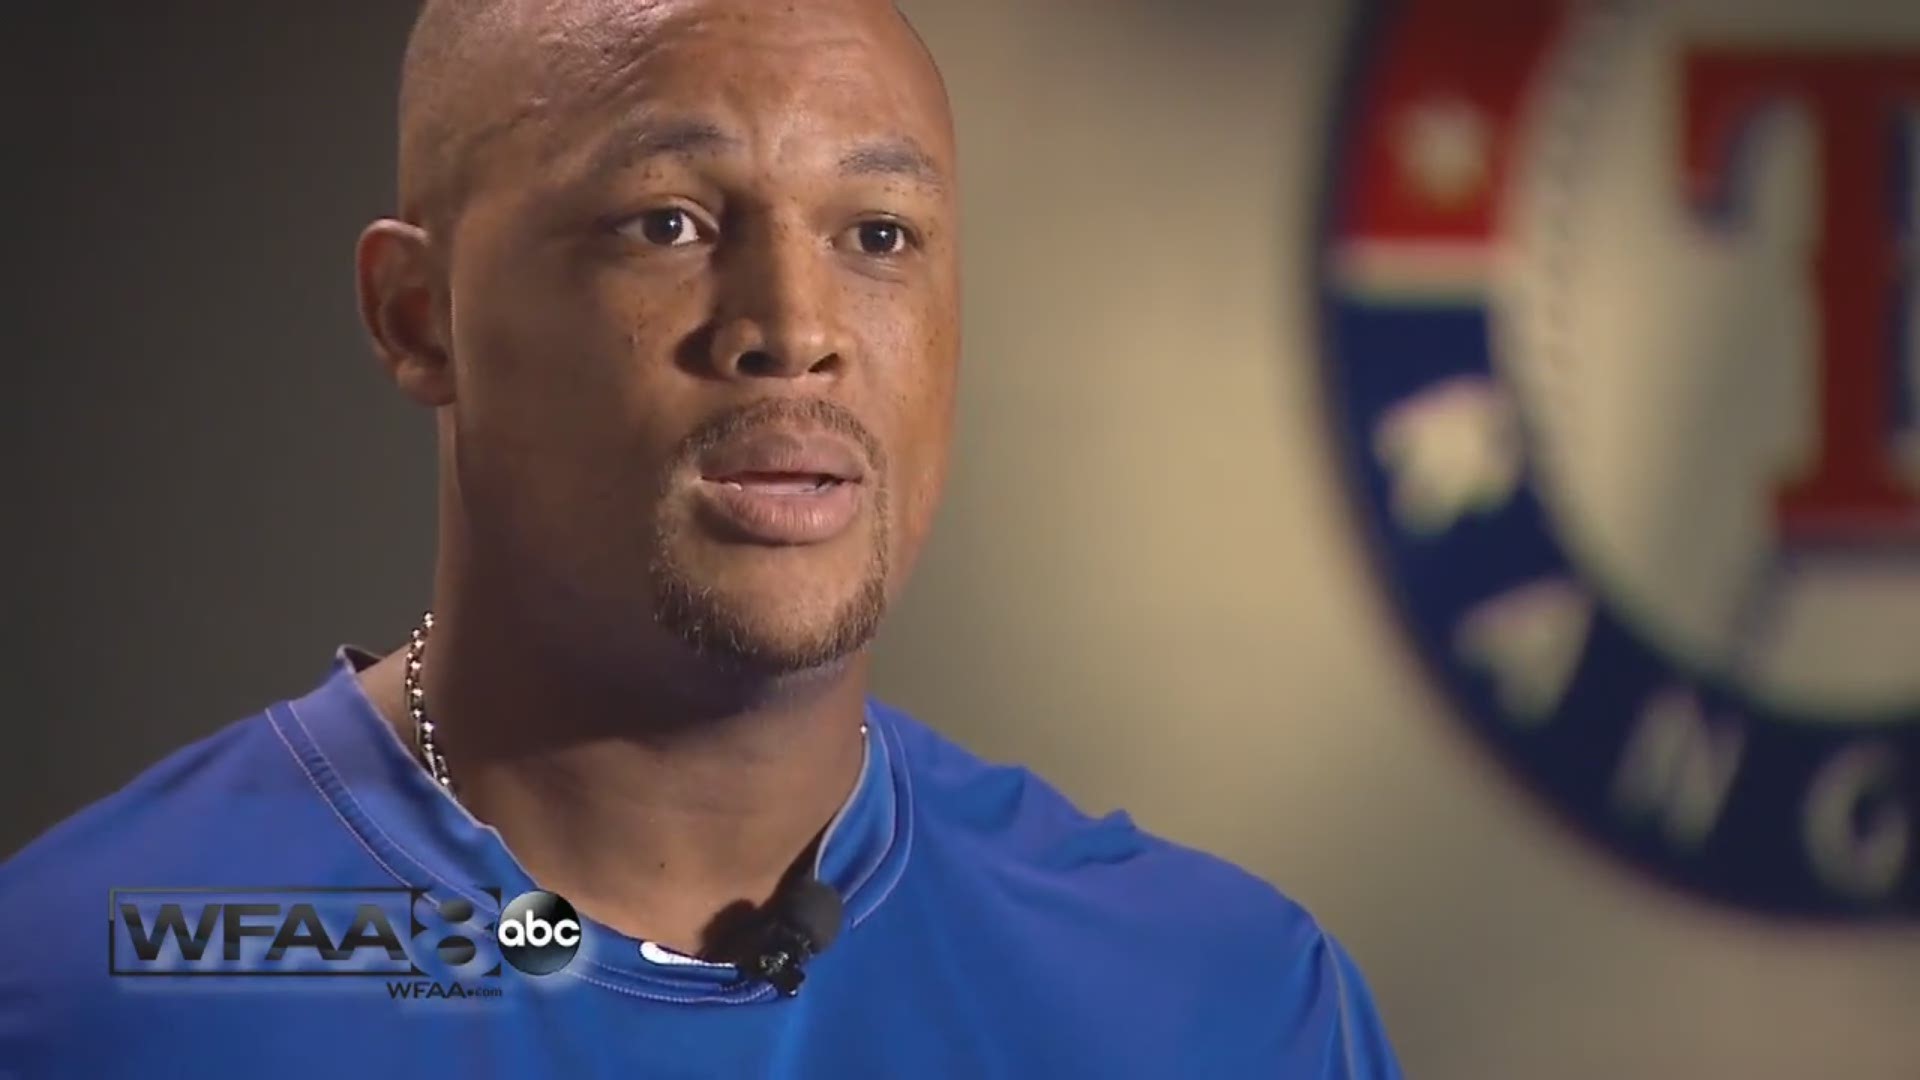 Rebecca Lopez sits down 1-on-1 with Rangers third baseman Adrian Beltre